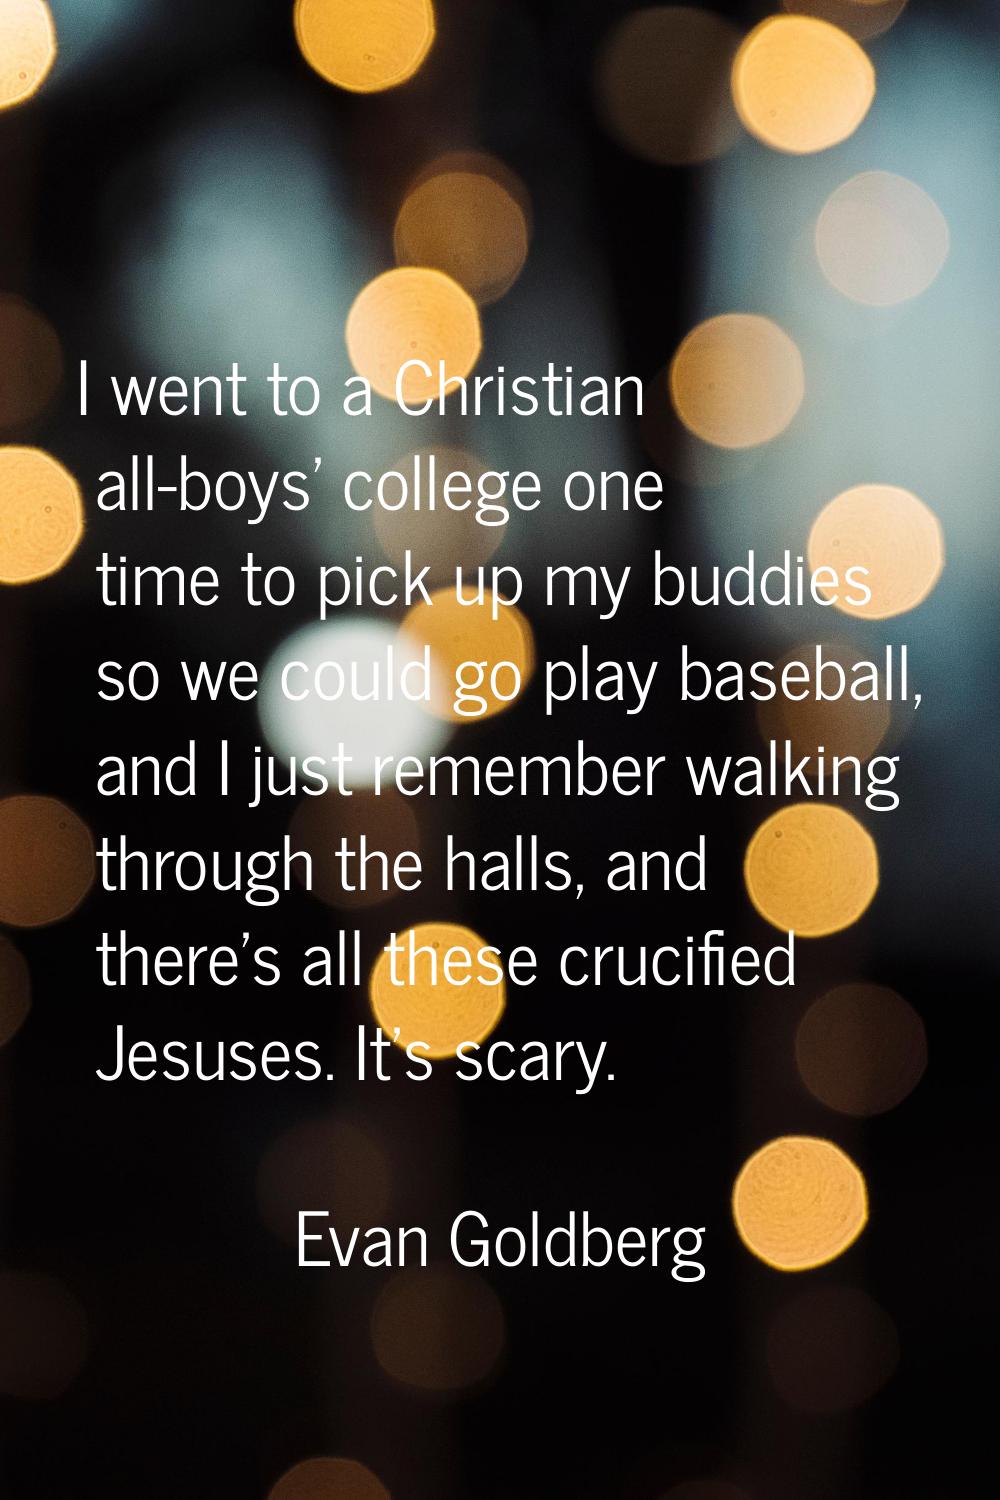 I went to a Christian all-boys' college one time to pick up my buddies so we could go play baseball